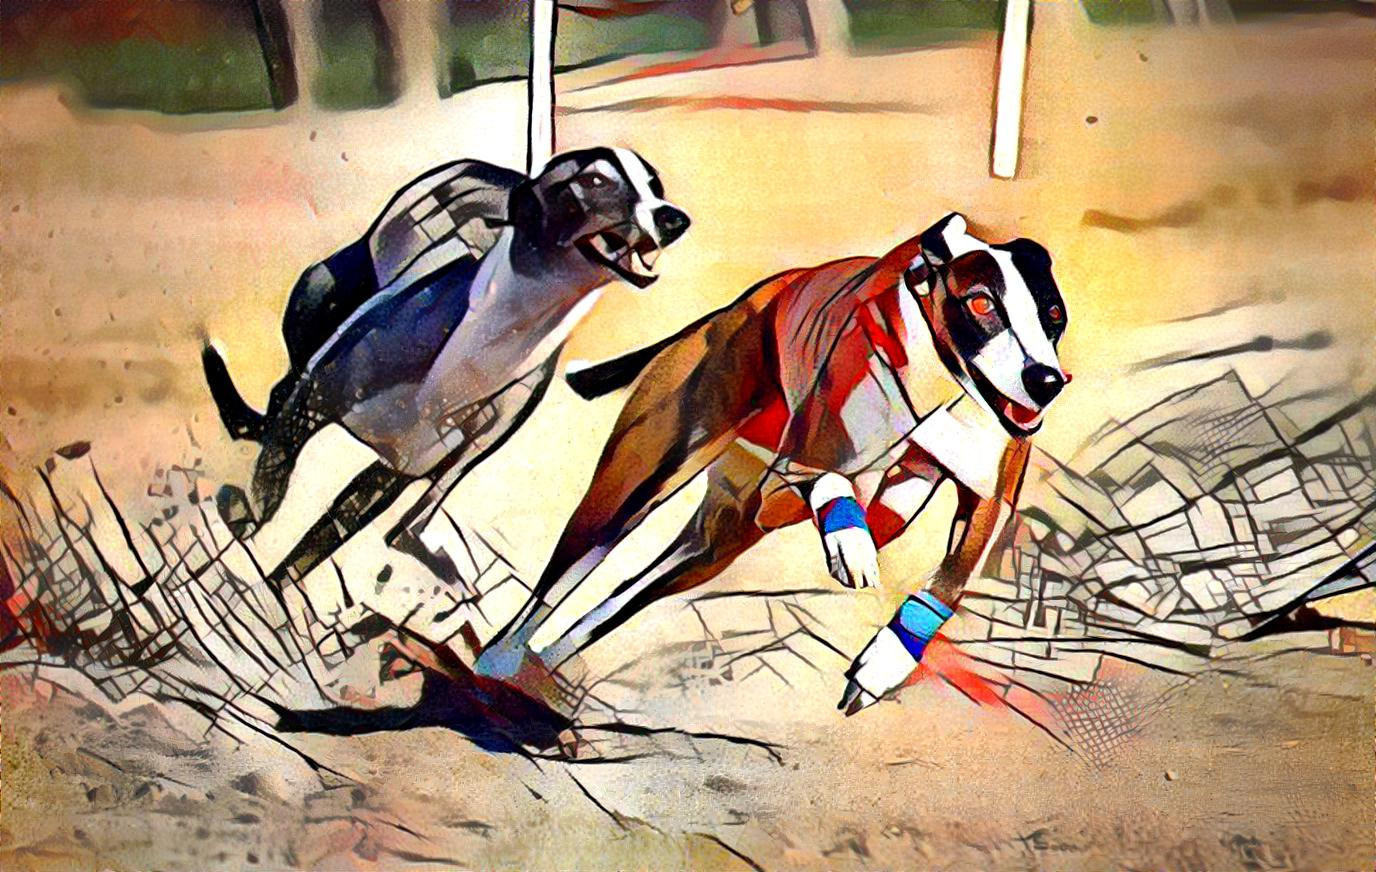 The Race (Image by Herbert Aust from Pixabay)